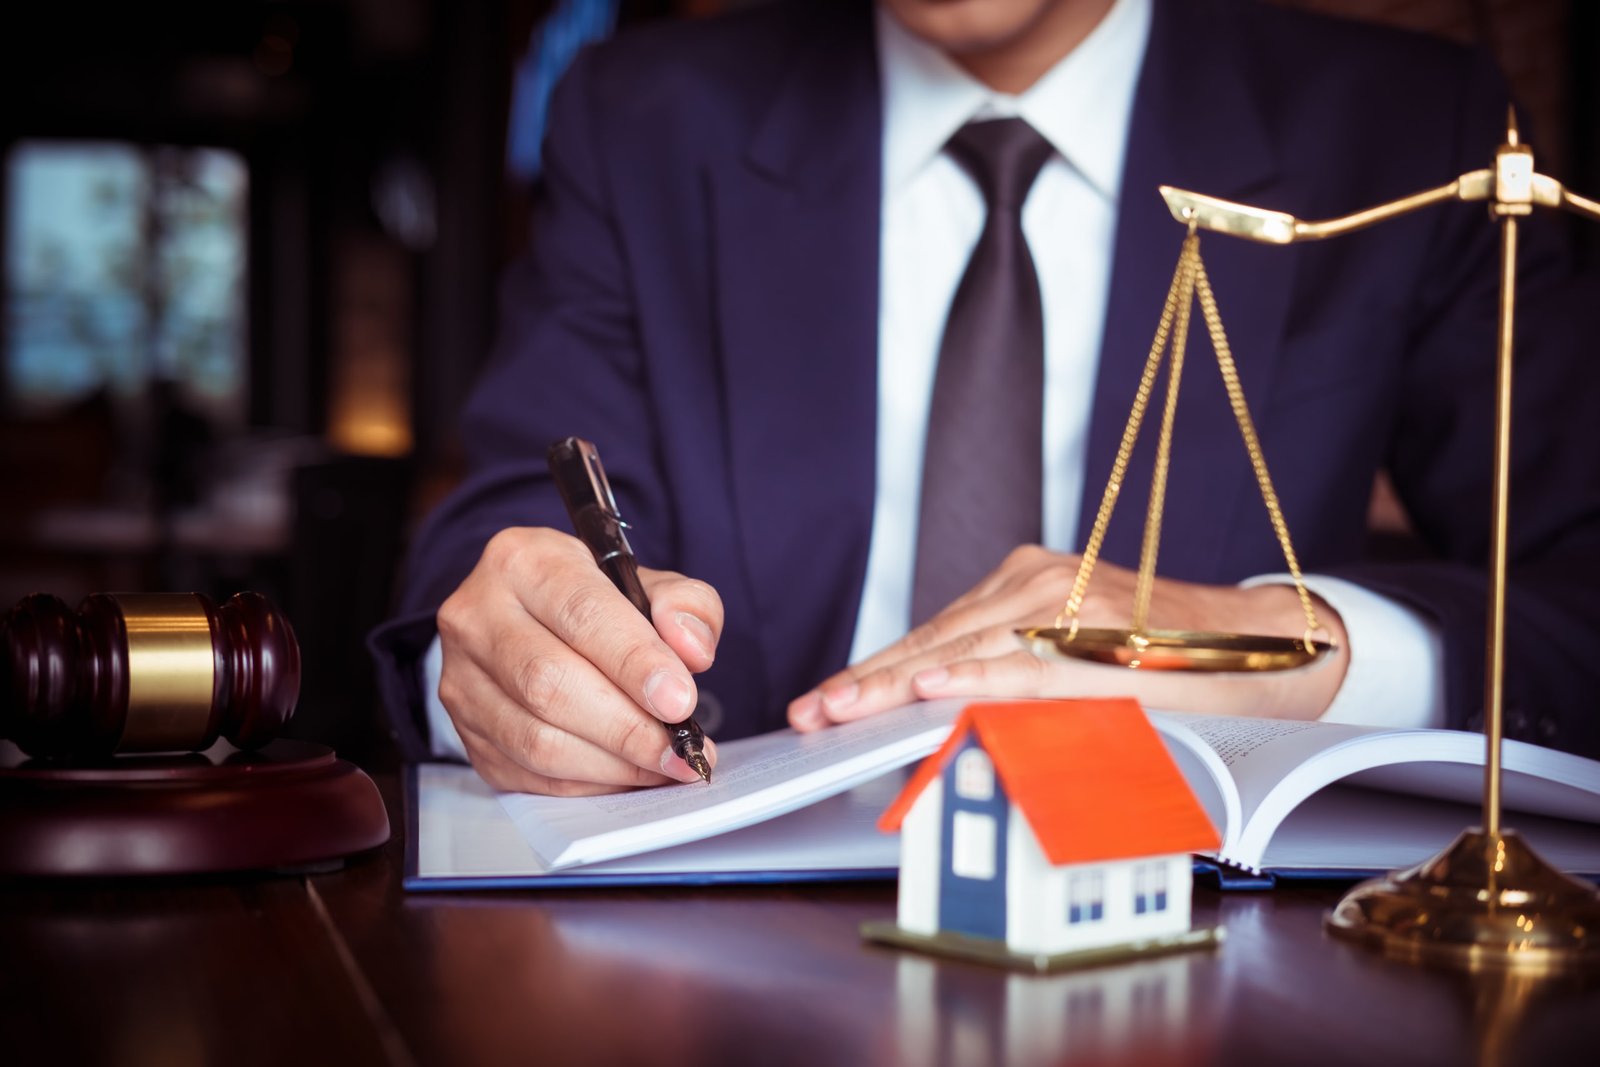 Is a Conveyancer Necessary in Today’s Legal World?